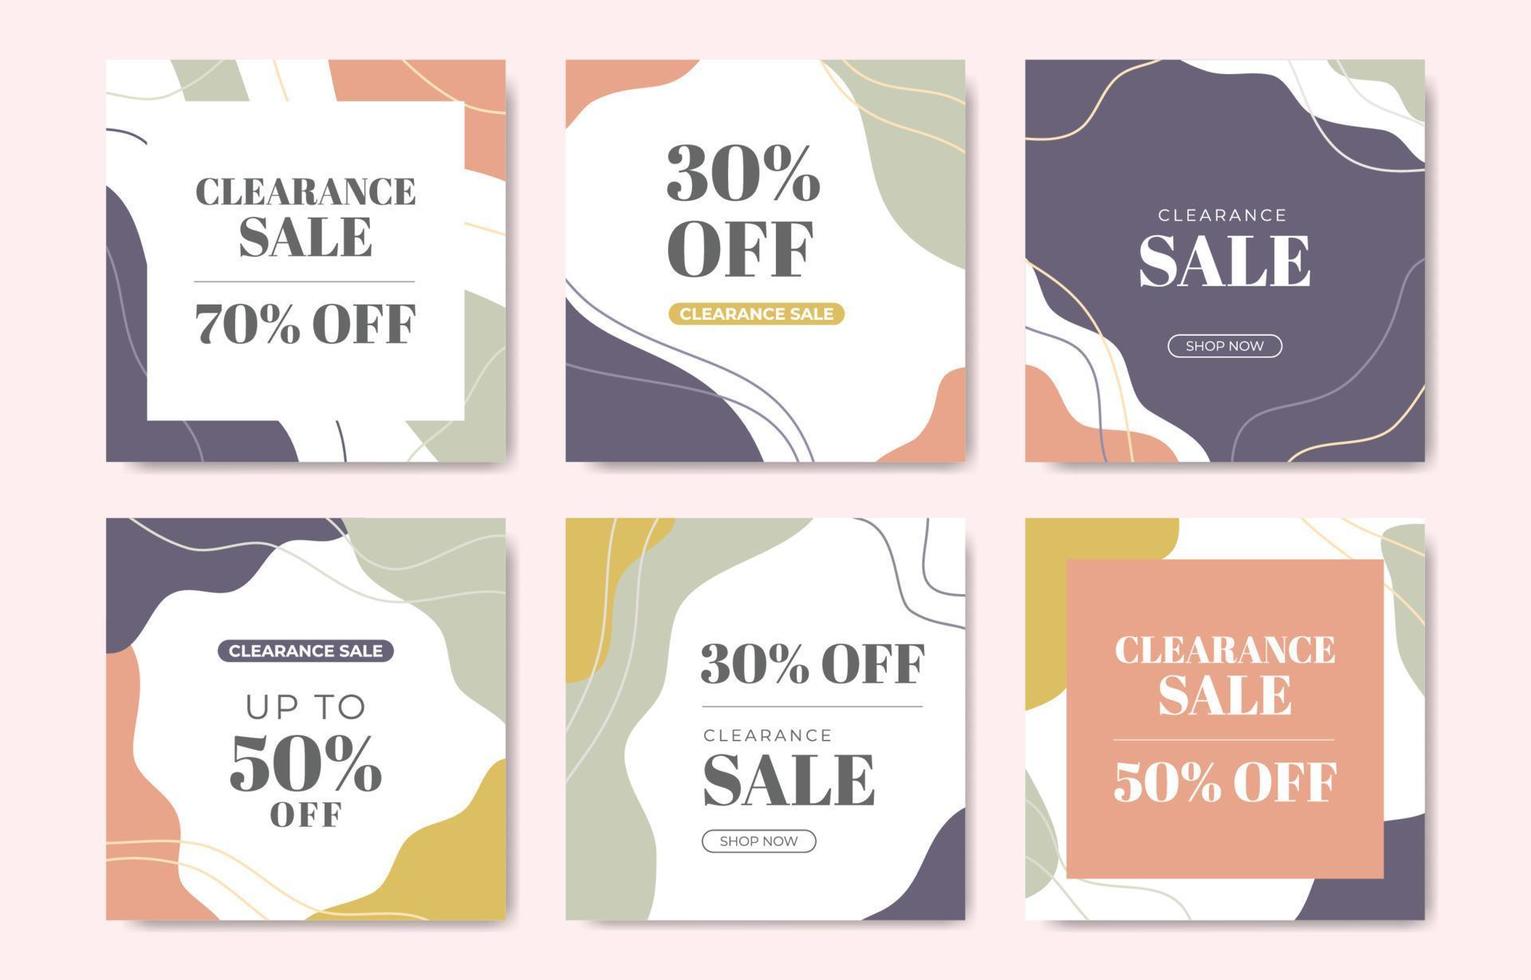 Aesthetic Pastel Concept Clearance Sale Social Media Post vector